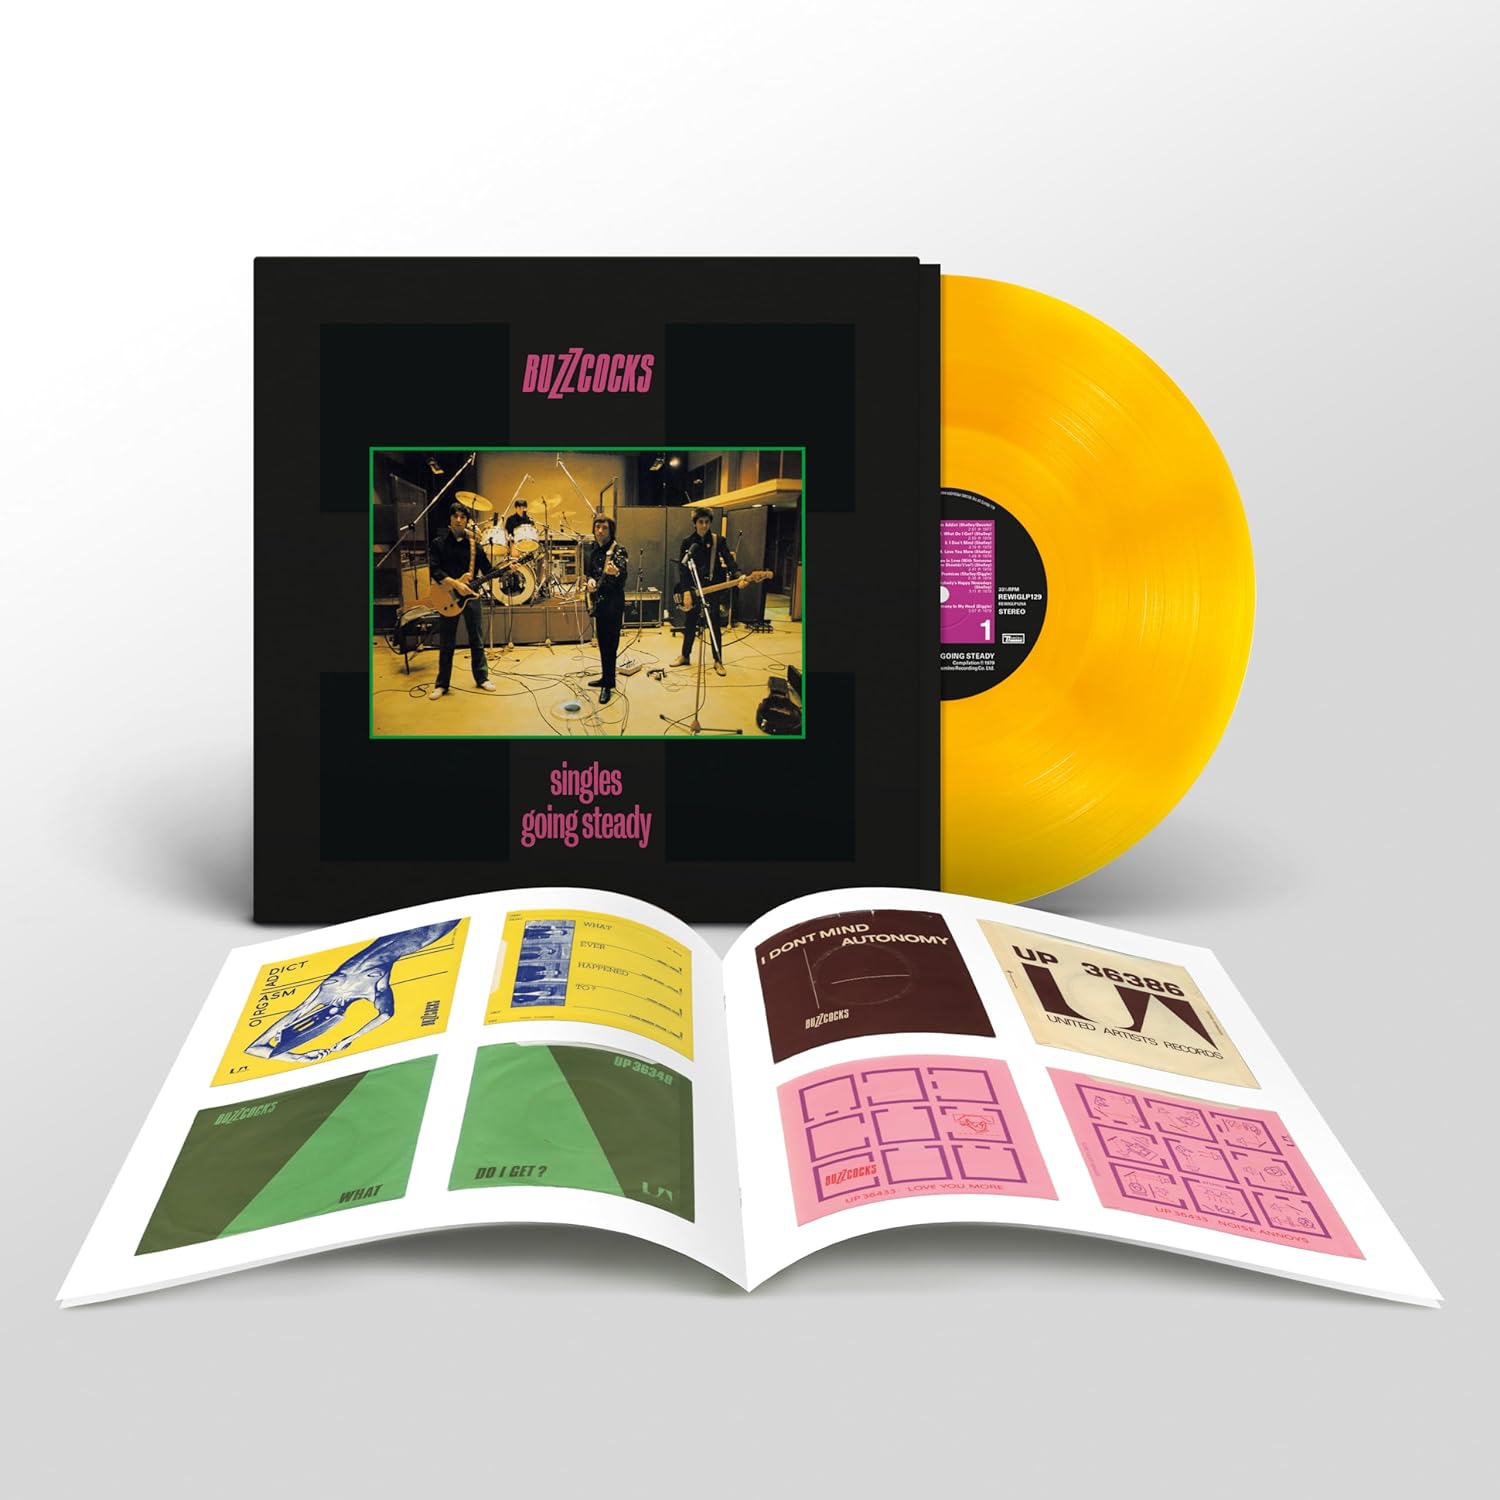 News – Buzzcocks – Singles Going Steady (Limited 45th Anniversary)